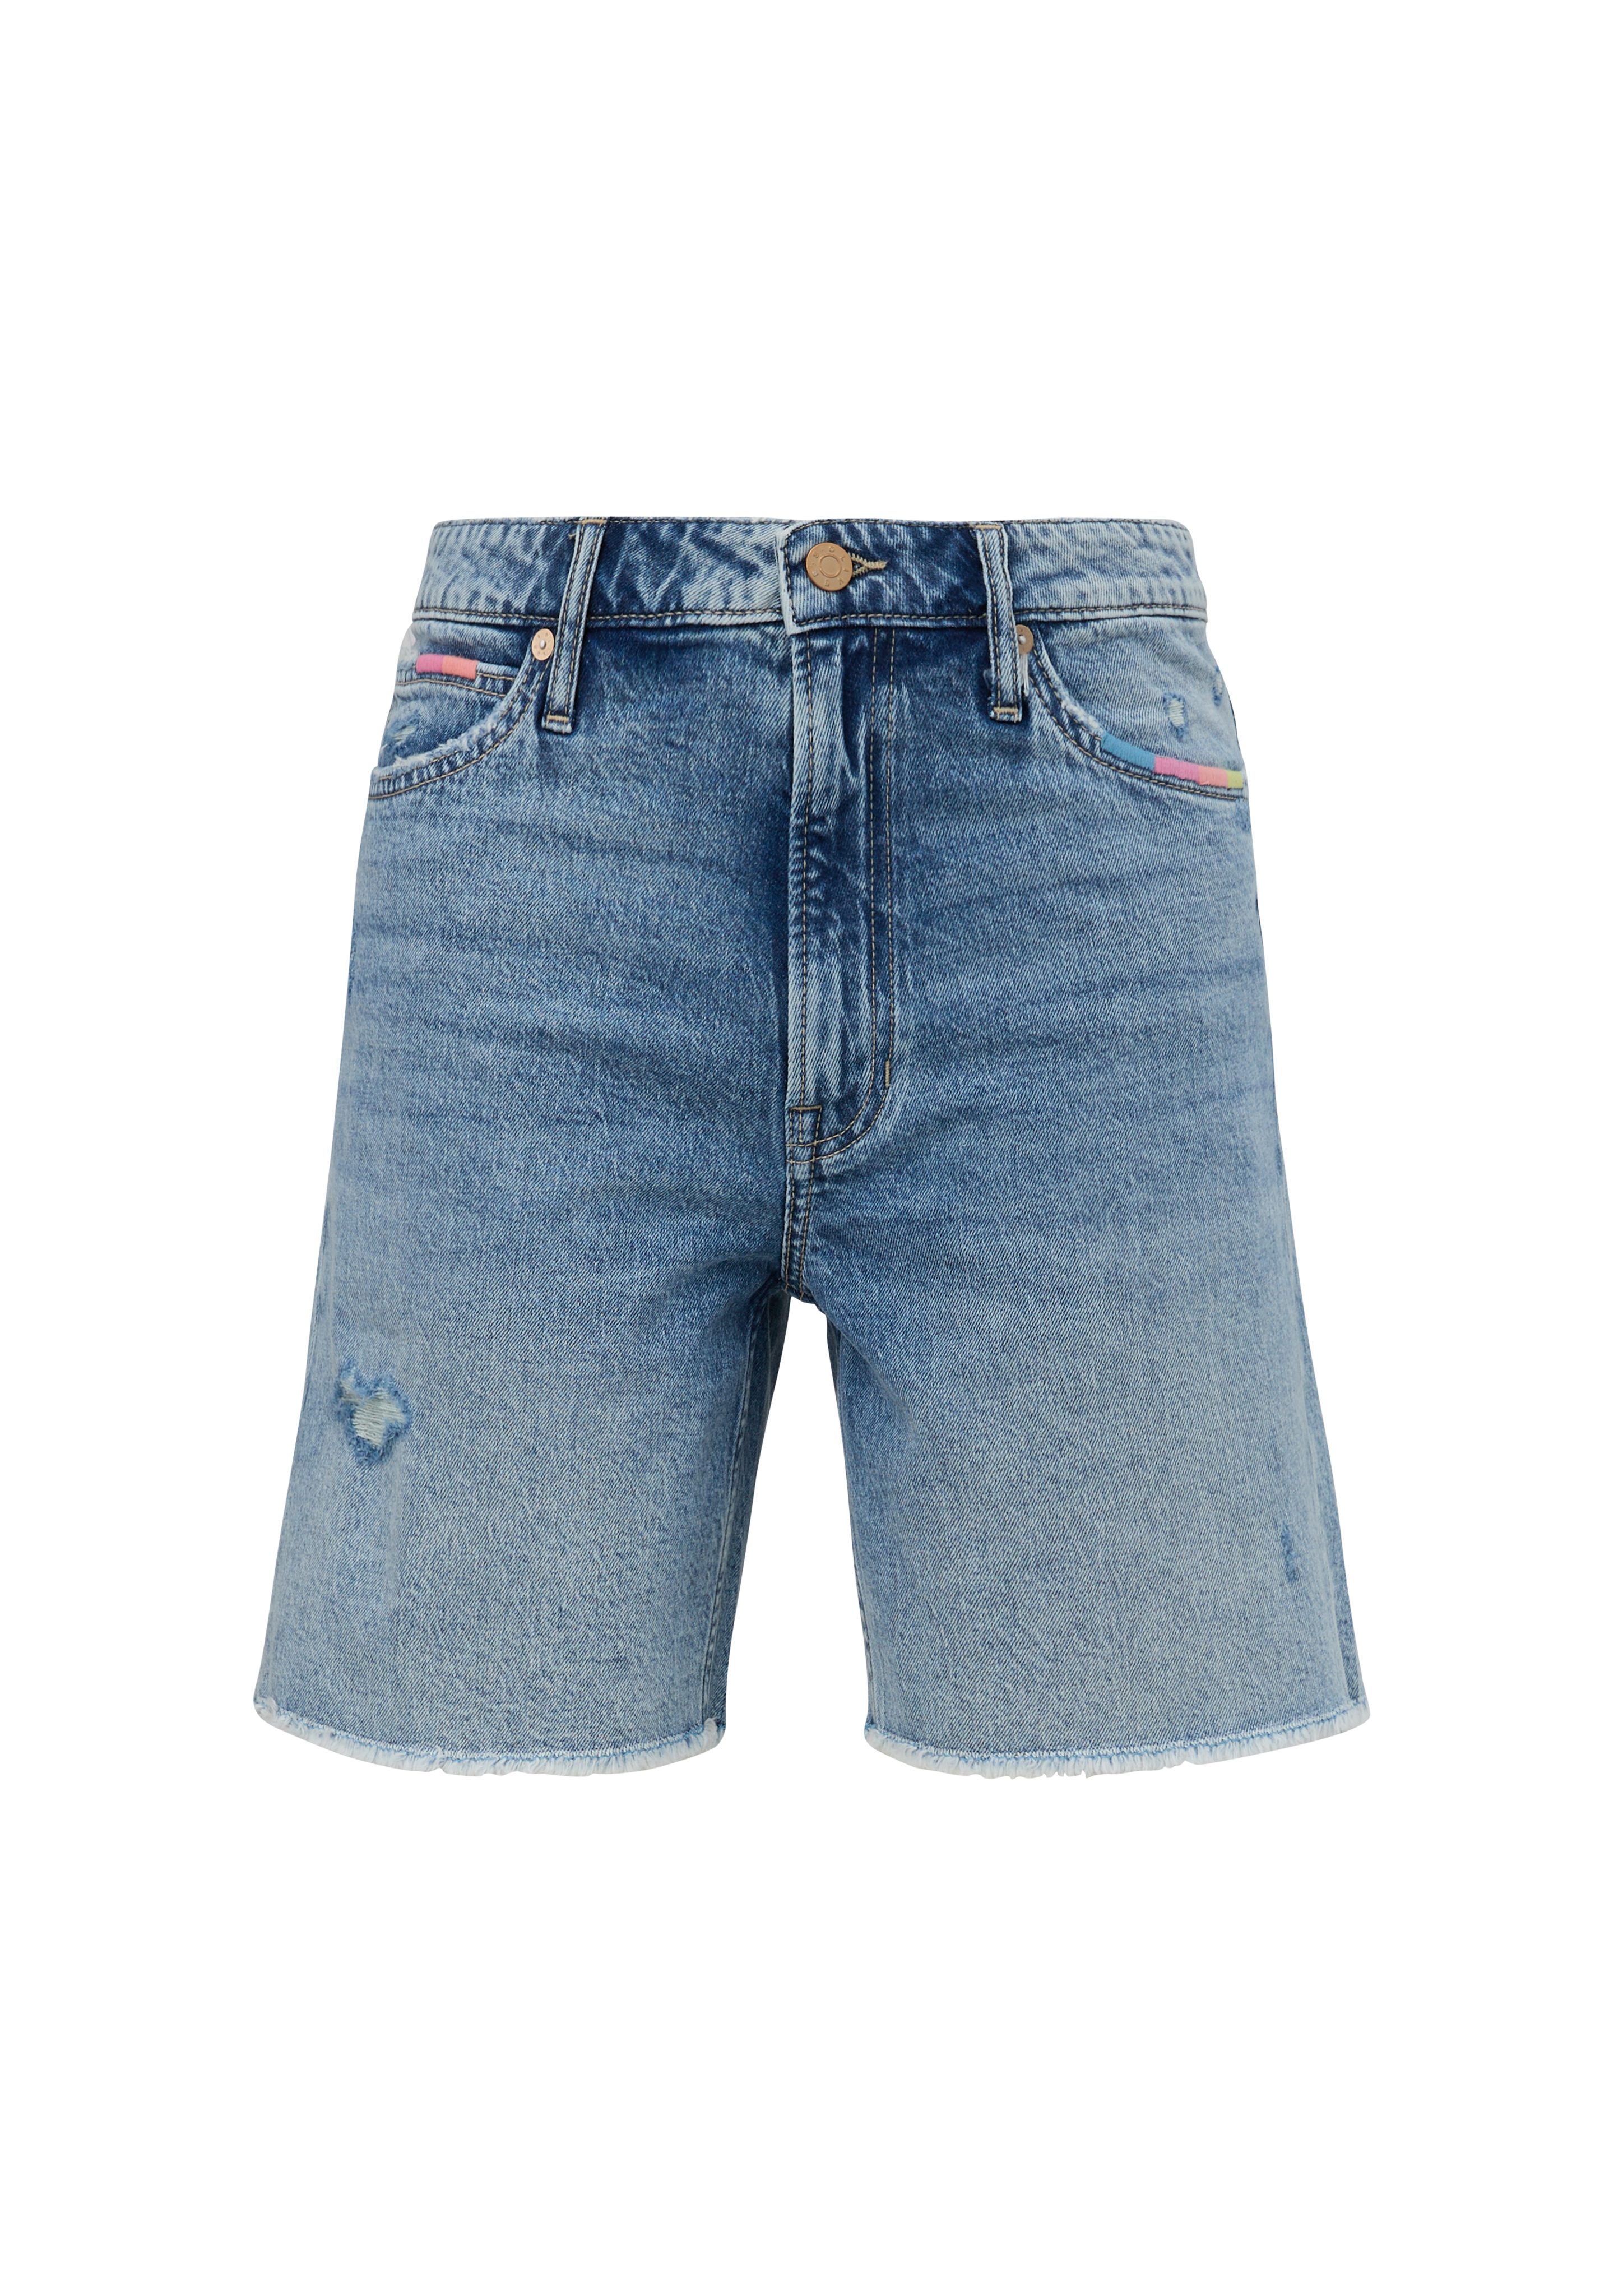 / Mid s.Oliver Jeans-Shorts Destroyes, Fit Relaxed Kontrast-Details / Leg Rise Waschung, Straight / Jeansshorts